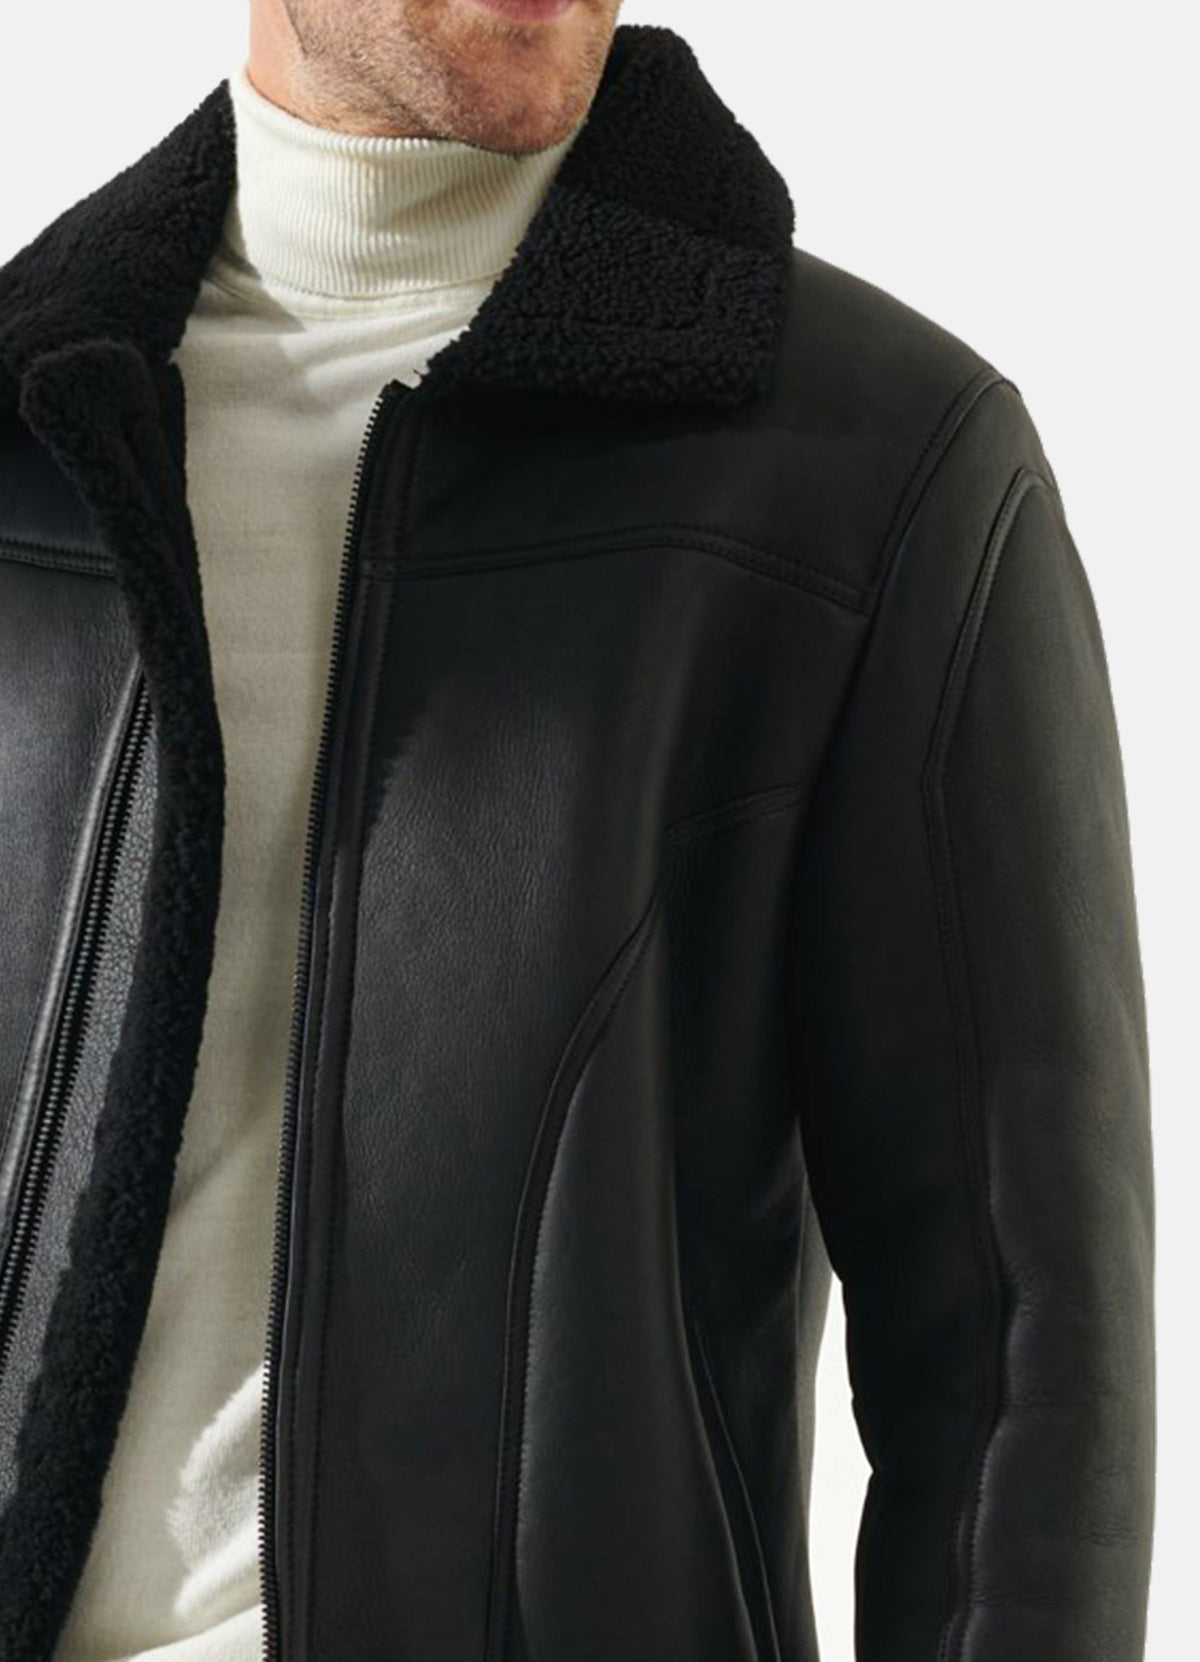 Mens Casual Black Shearling Leather Jacket